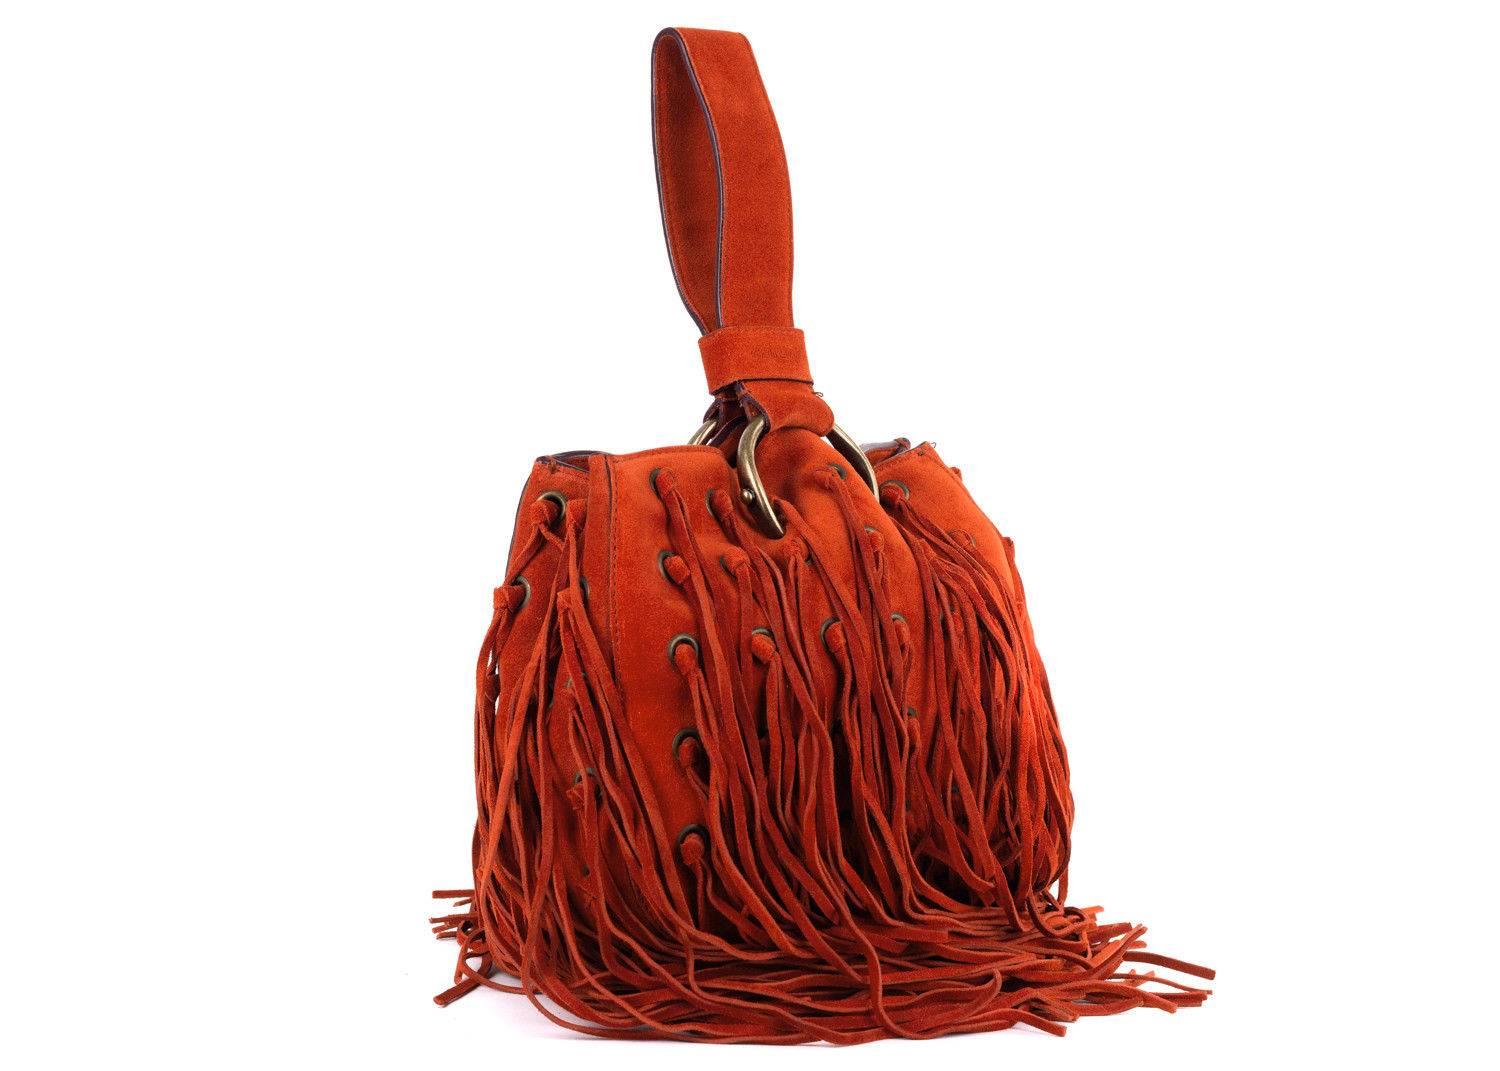 Roberto Cavalli Bright Orange Suede Eyelet Fringe Wristlet Bucket Bag In New Condition For Sale In Brooklyn, NY